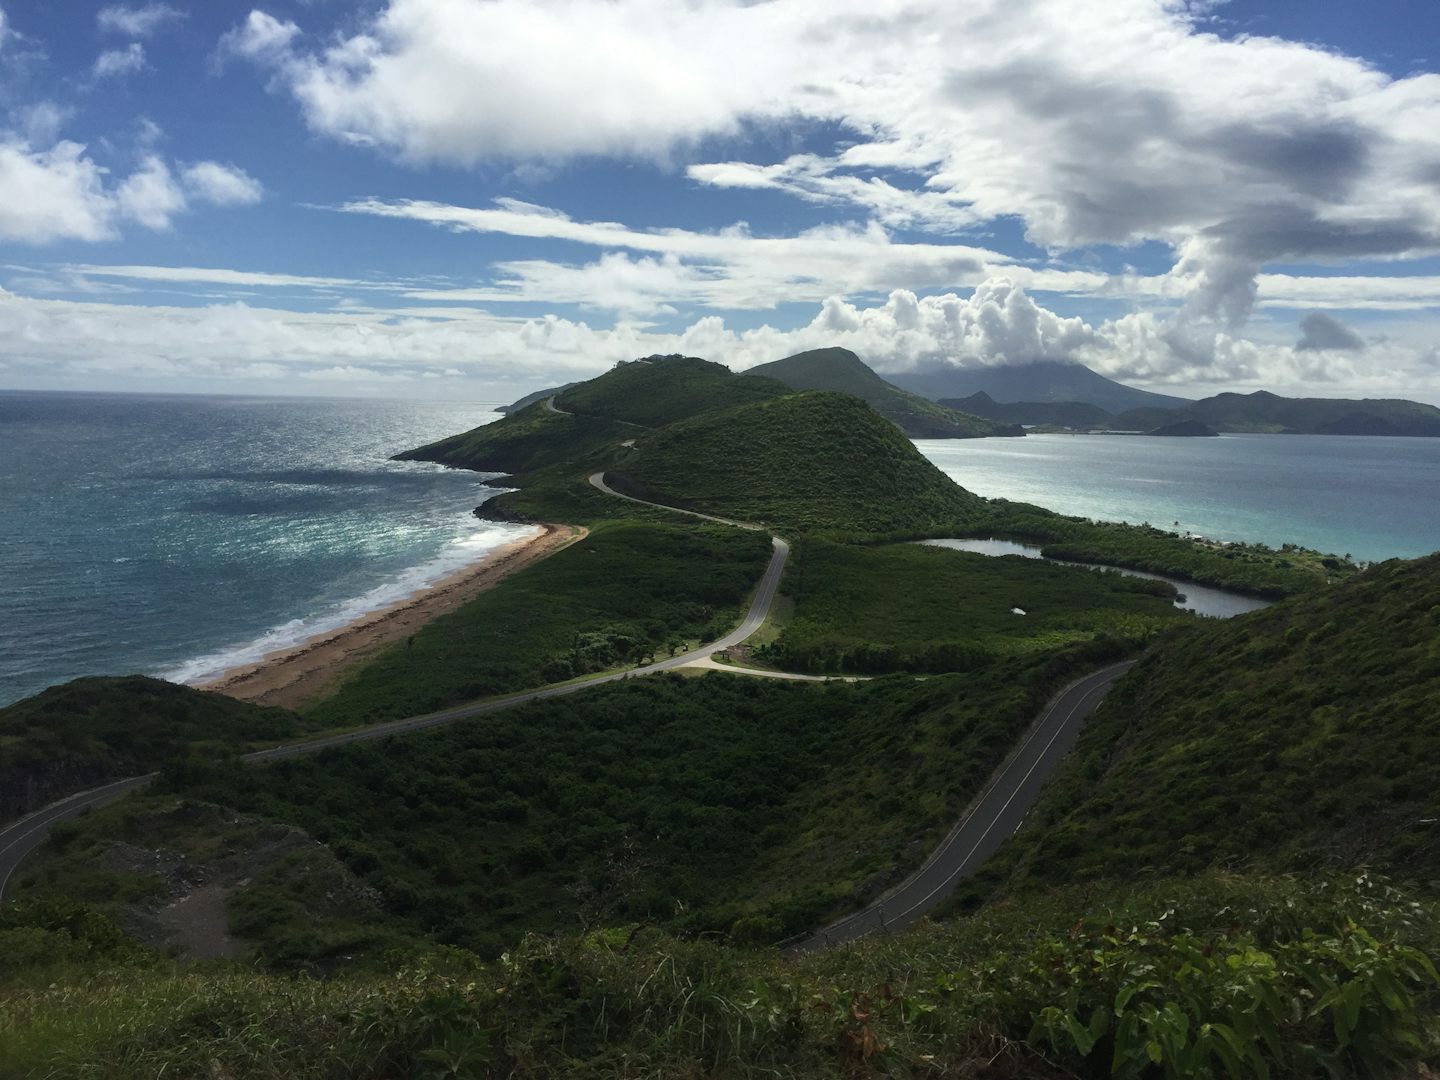 Atlantic on the left and Caribbean on the right from hill top on St. Kitts.